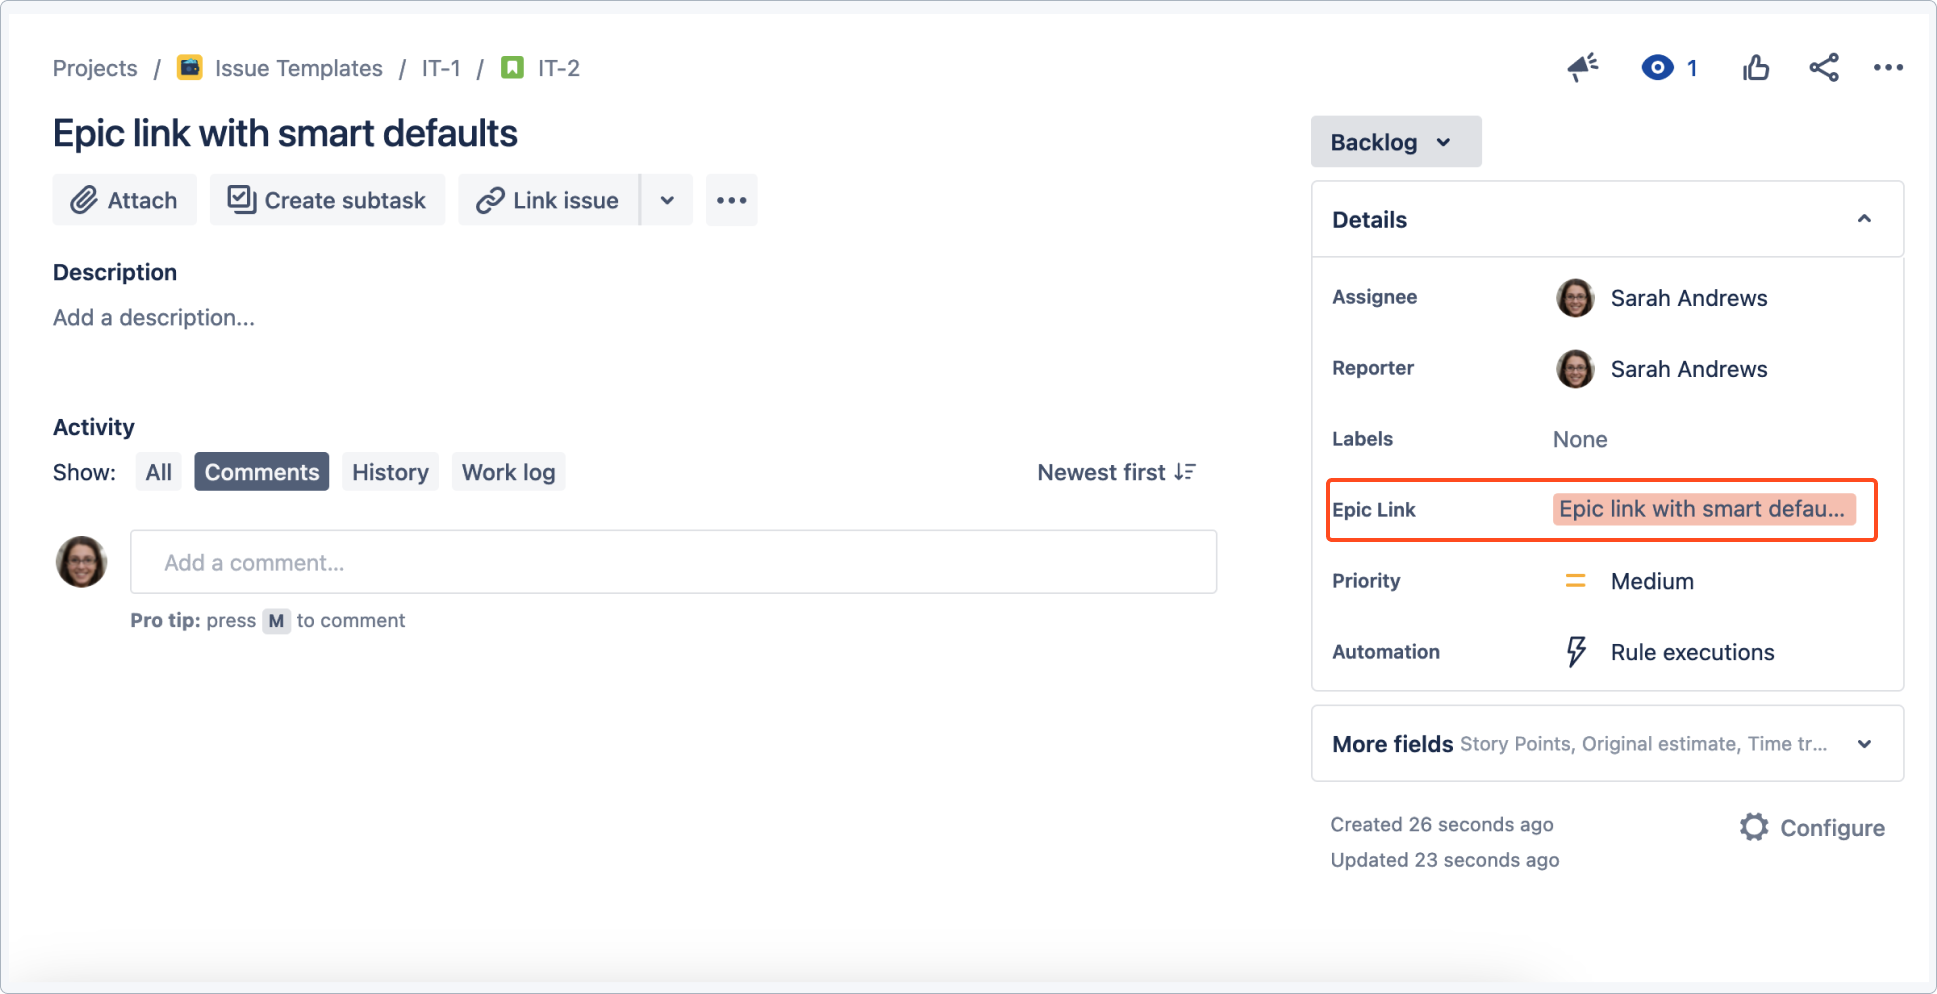 Issue Templates for Jira Cloud: Static Variables